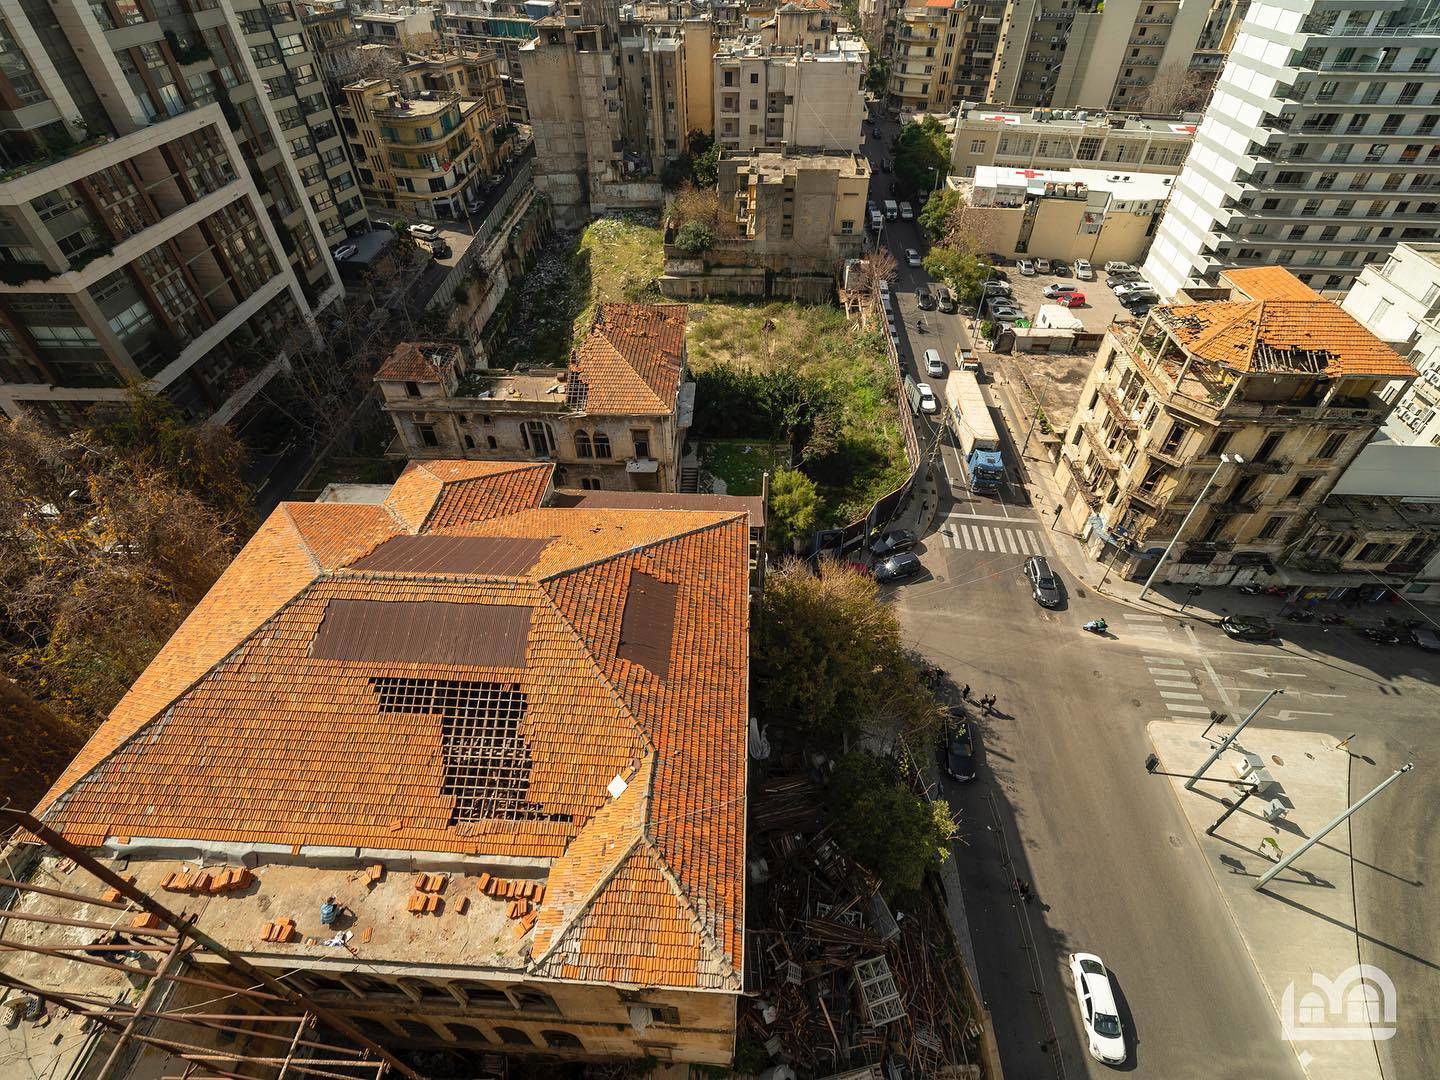 The heritage houses in Lebanon: Beirut is an example